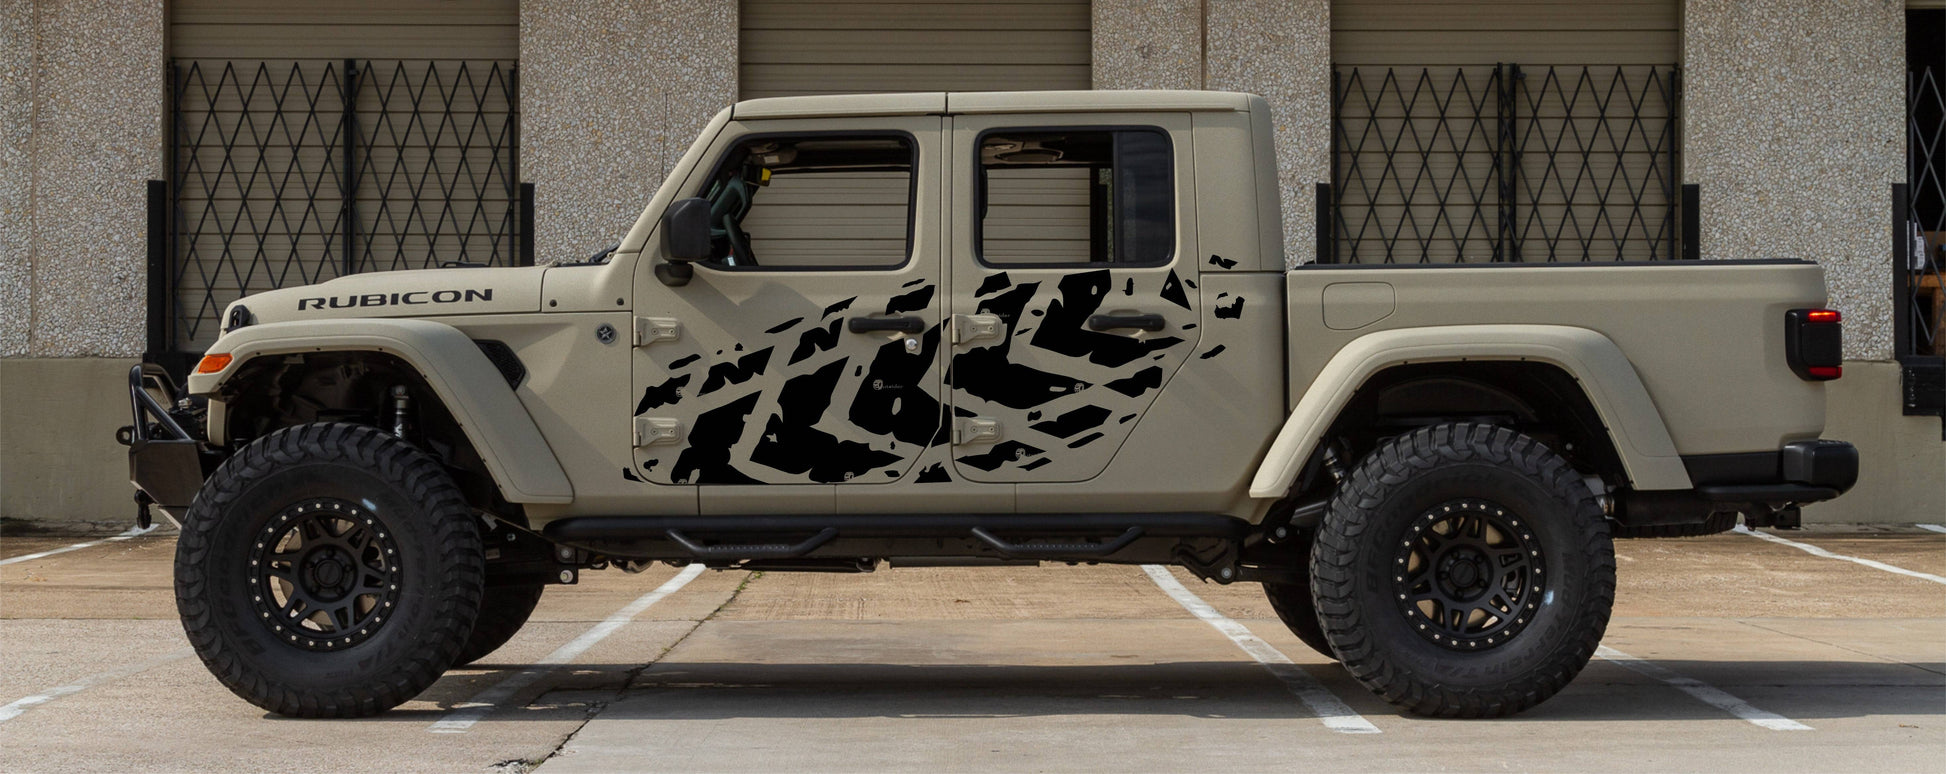 Set of Tire Tracks Decals Stickers For Jeep Gladiator Trucks